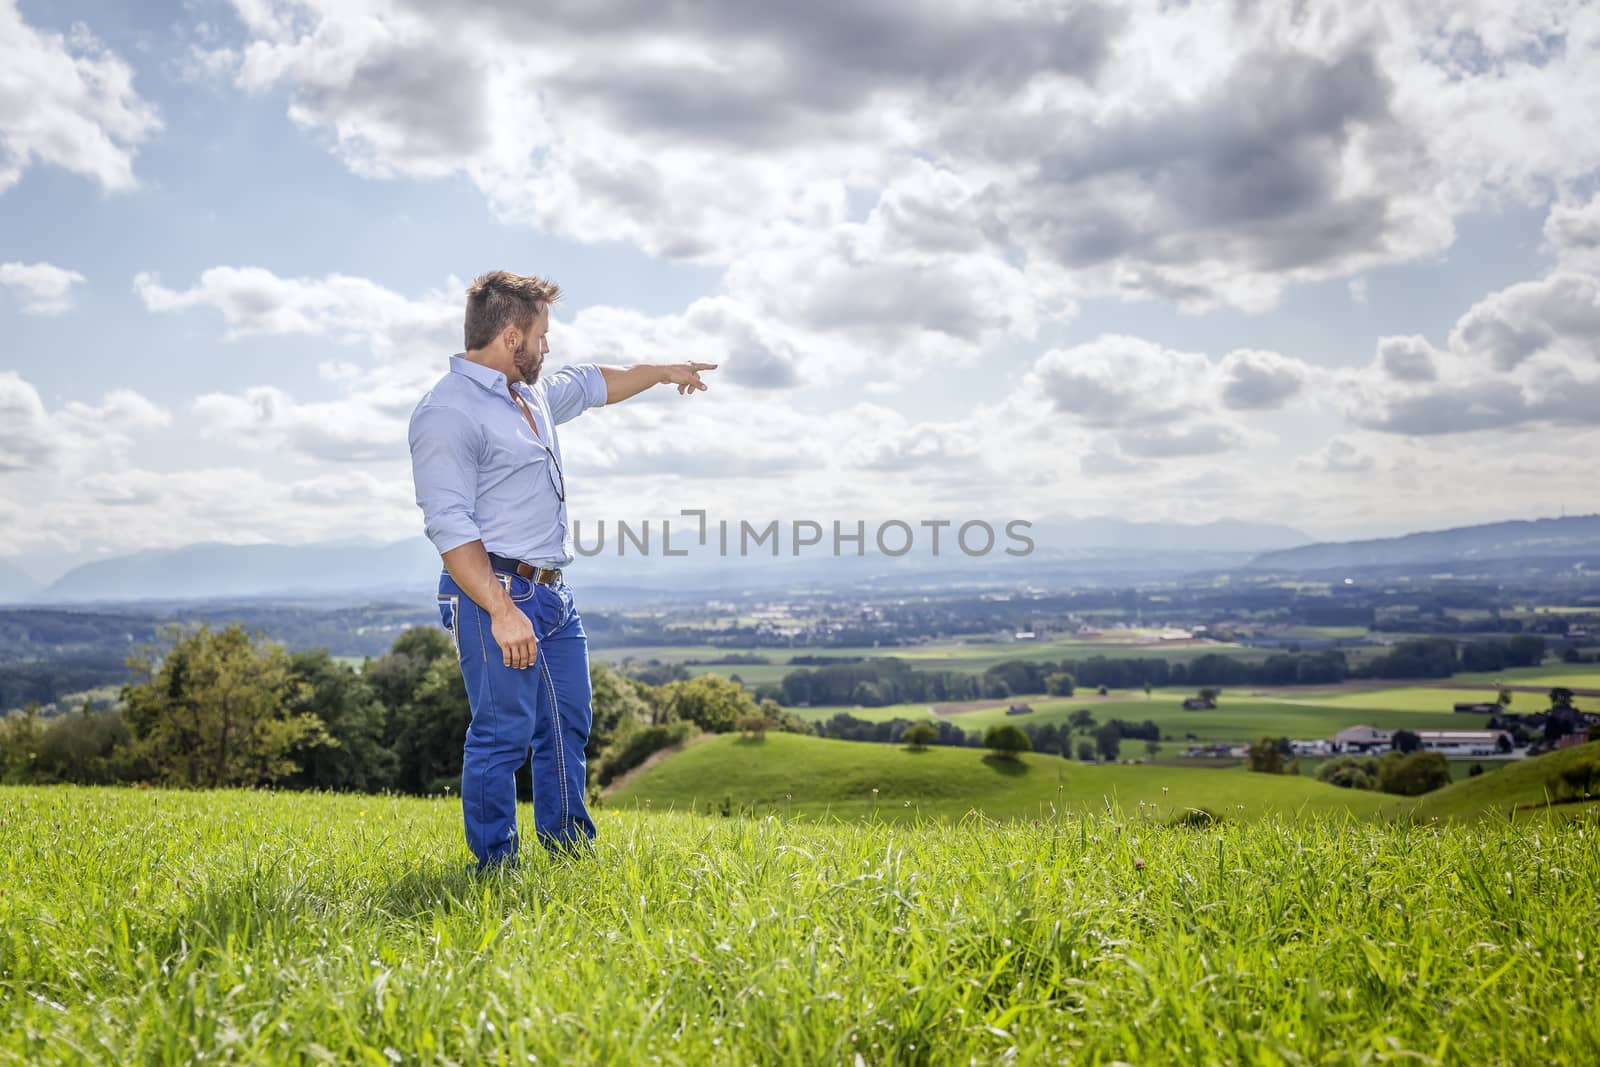 An image of a man outdoors pointing